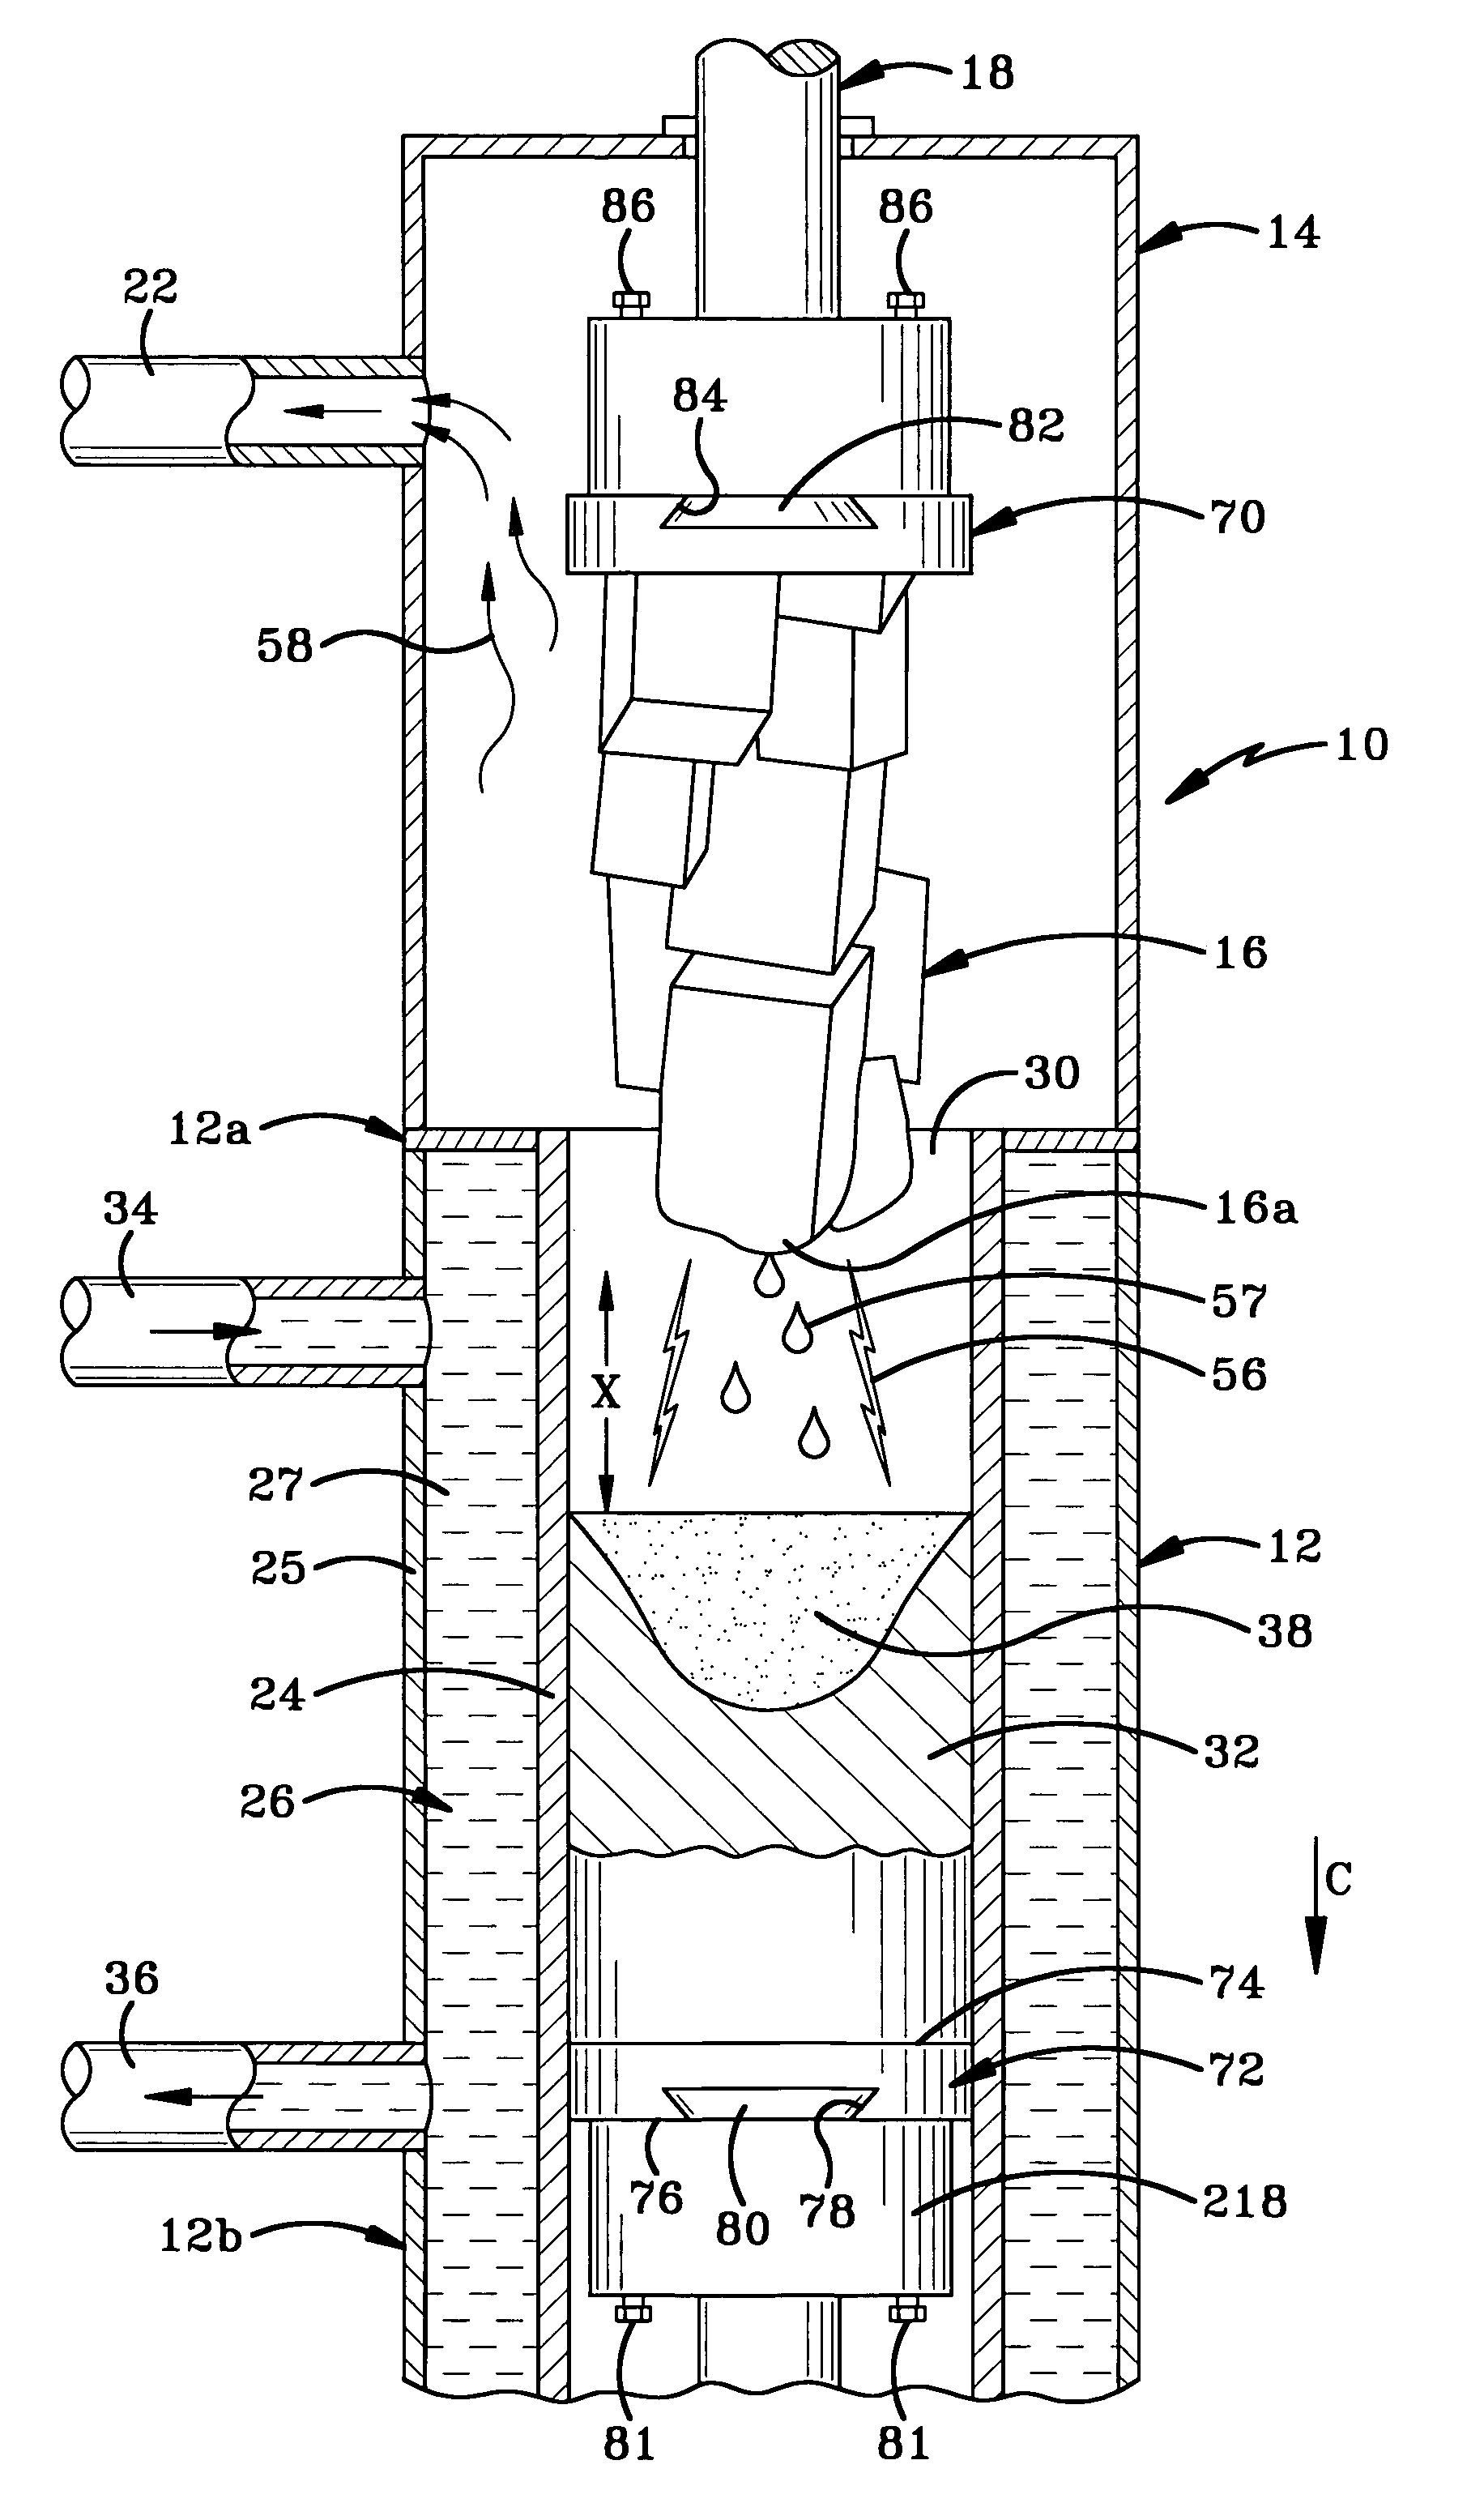 Method of manufacturing electrodes and a reusable header for use therewith